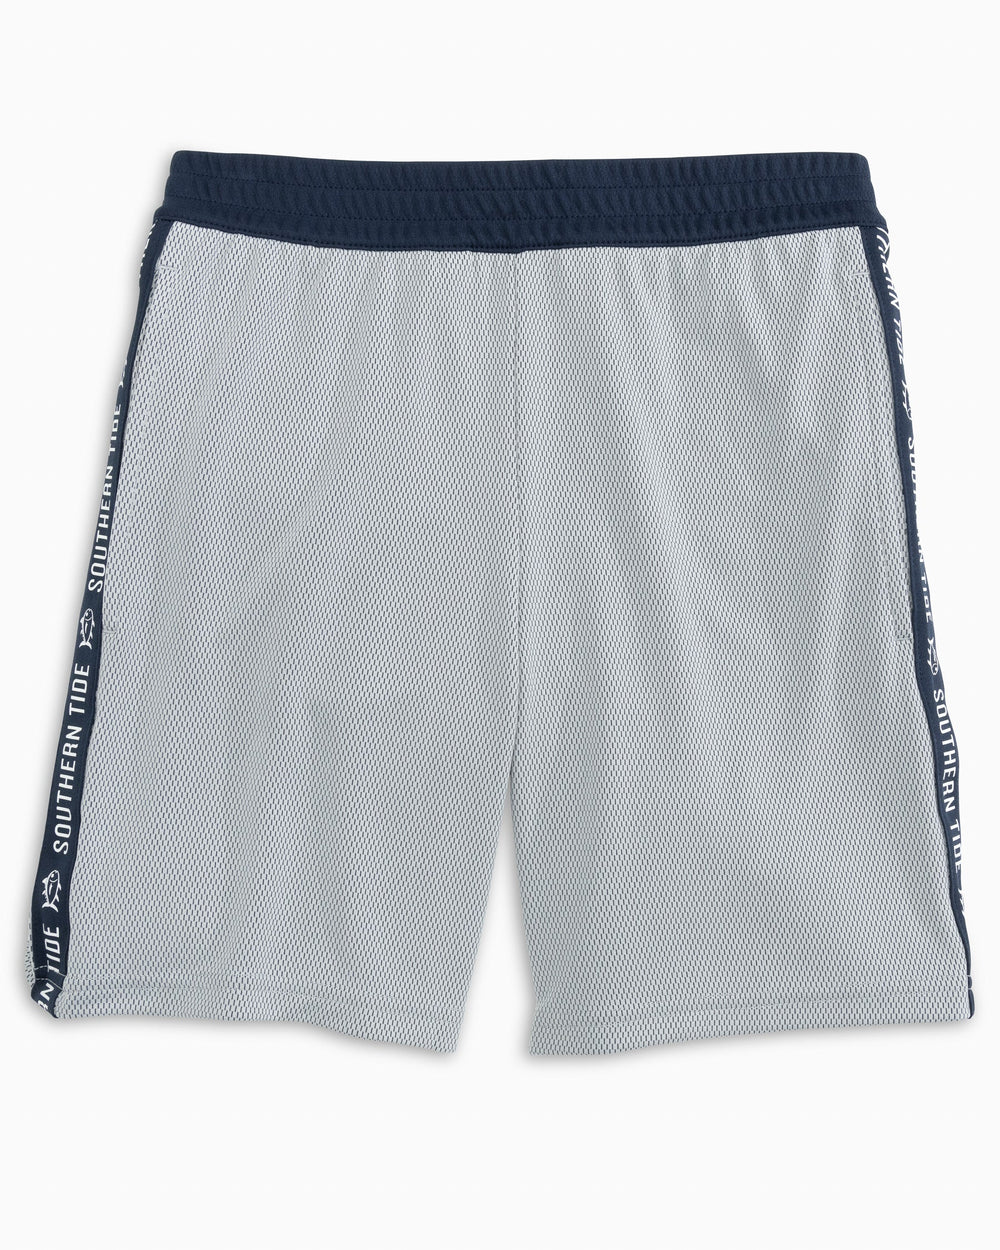 The front view of the Kid's Melink Short by Southern Tide - Seagull Grey